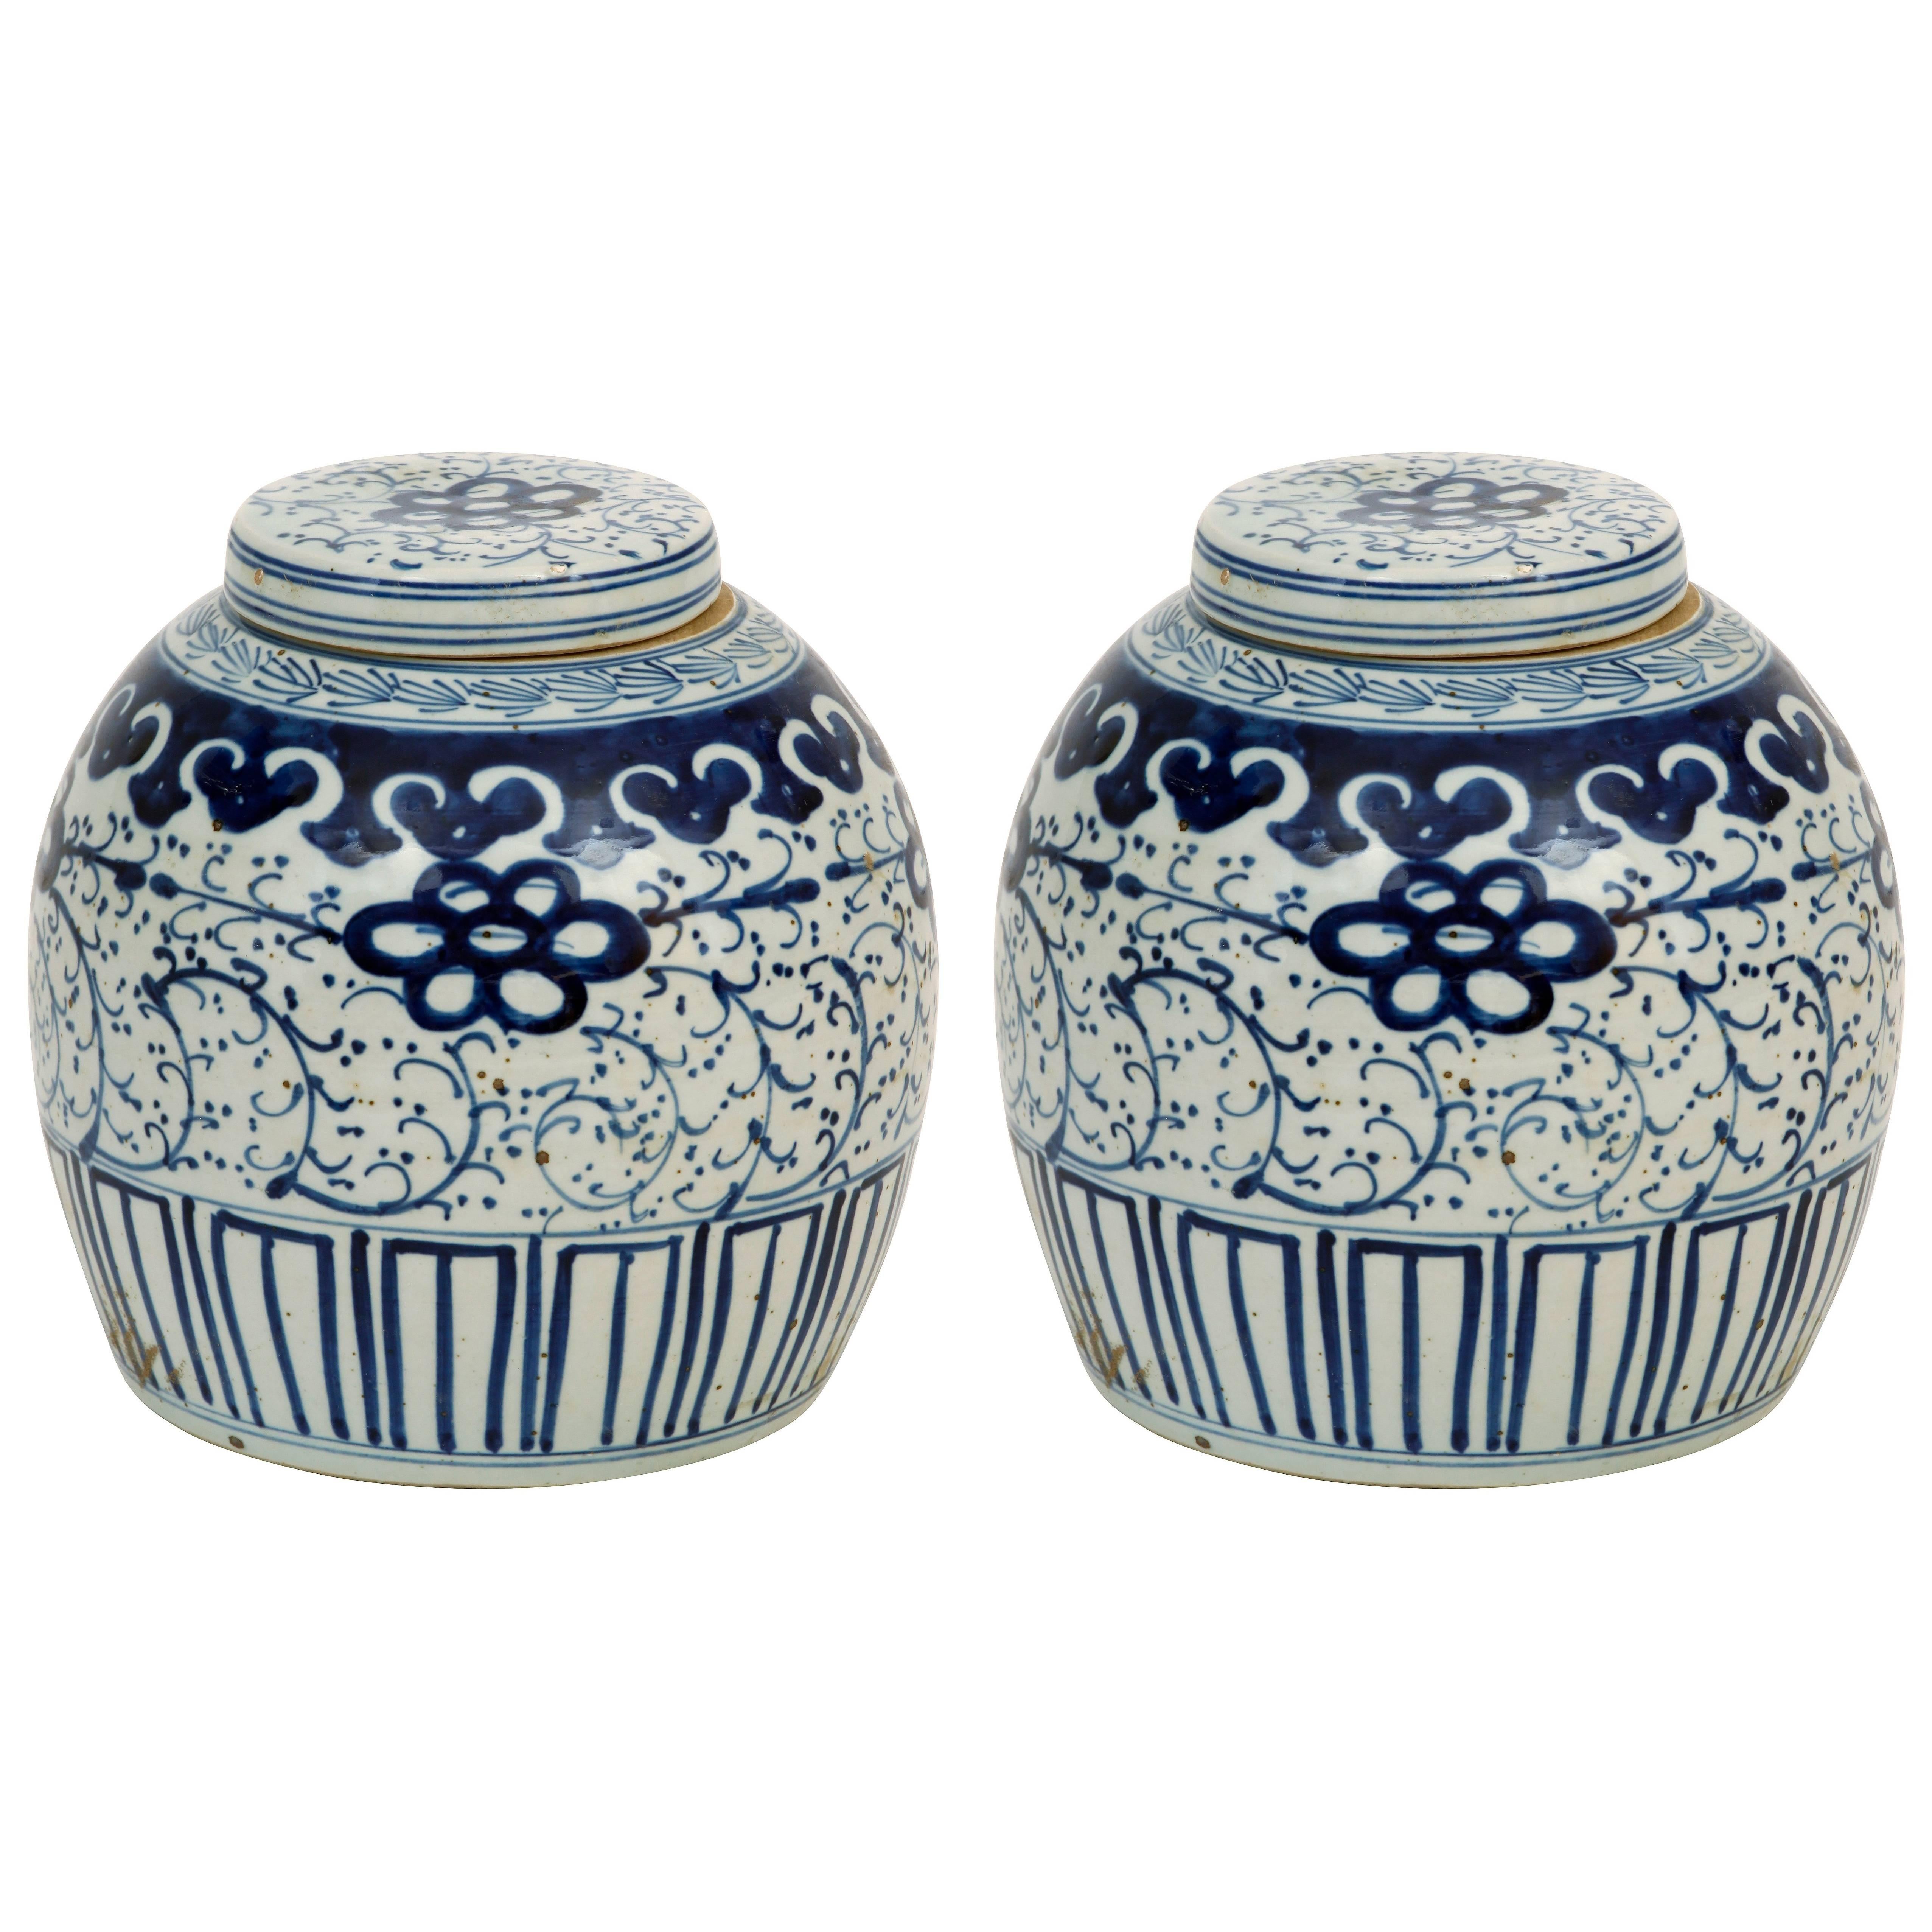 Pair of Chinese Export Ginger Jars